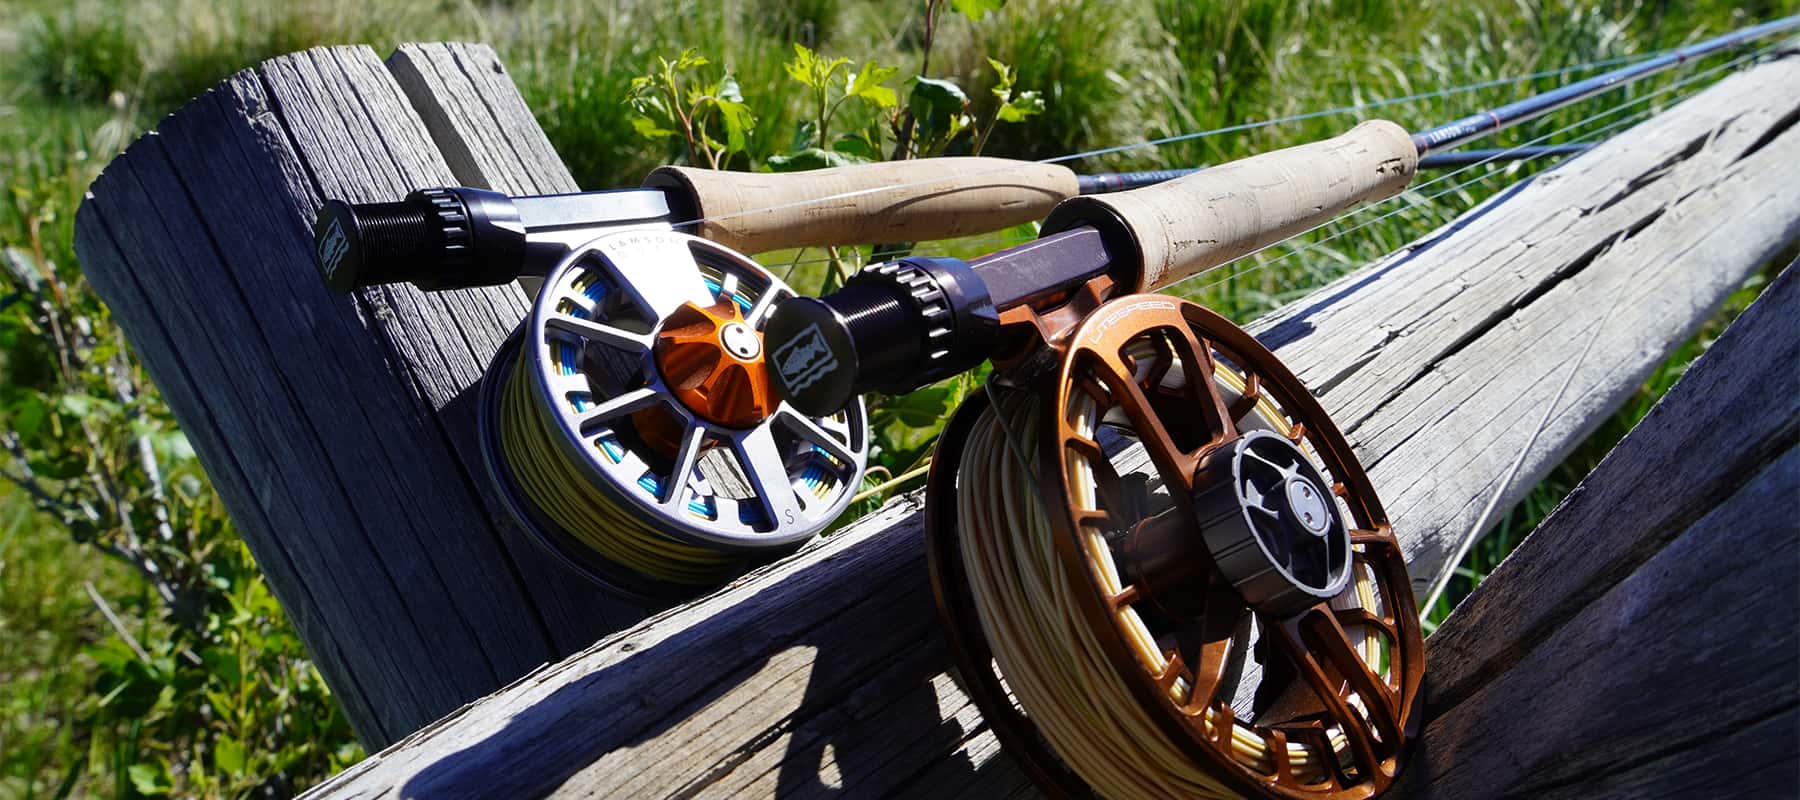 Lamson Reels | Lamson Fly Reels are born in Idaho and used to be called waterworks-lamson